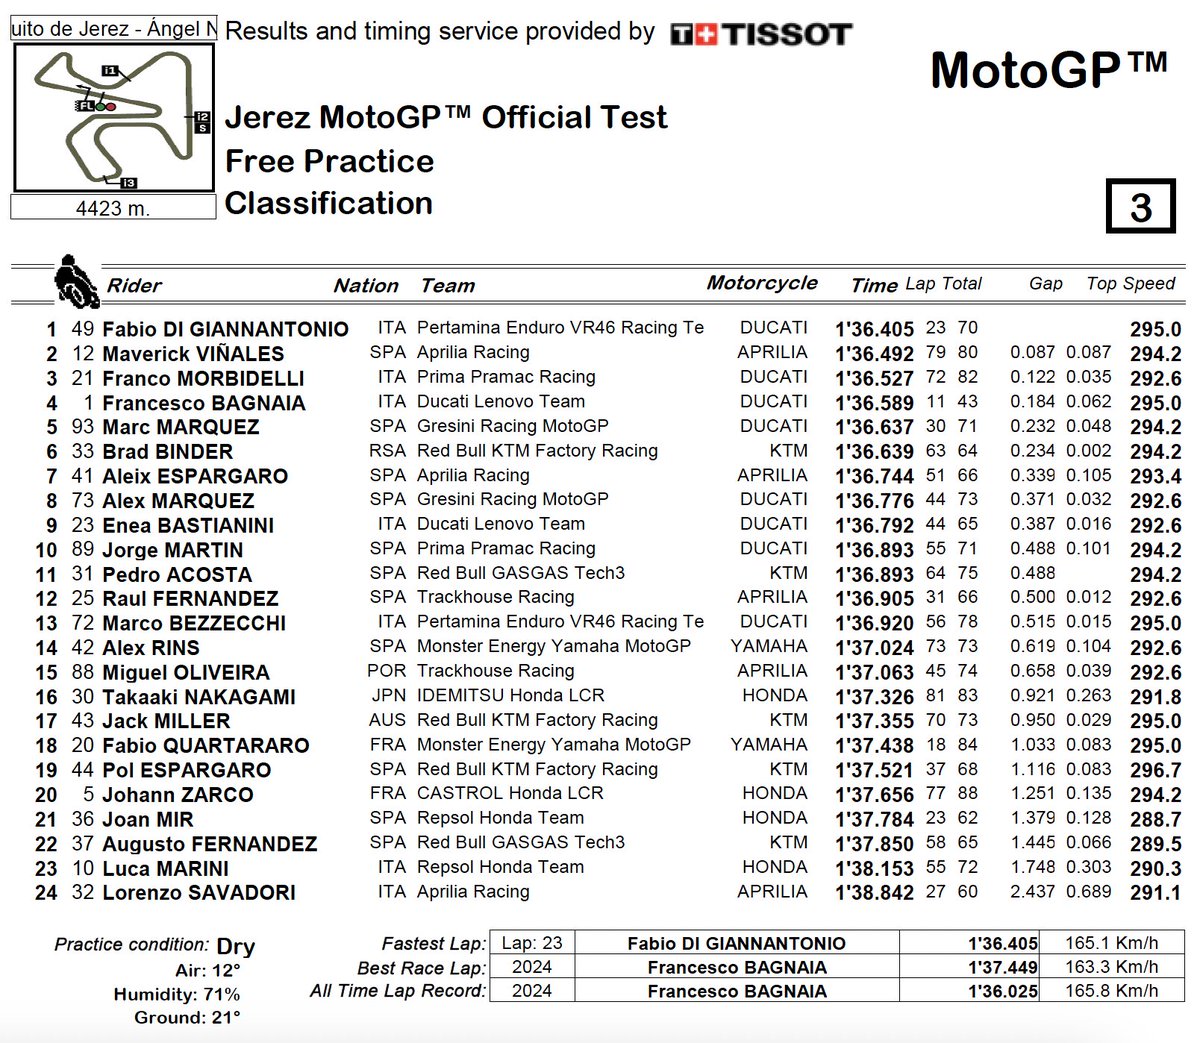 P16 and 83 laps for @takanakagami30 and P20 and 88 laps for @JohannZarco1 in #JerezTest